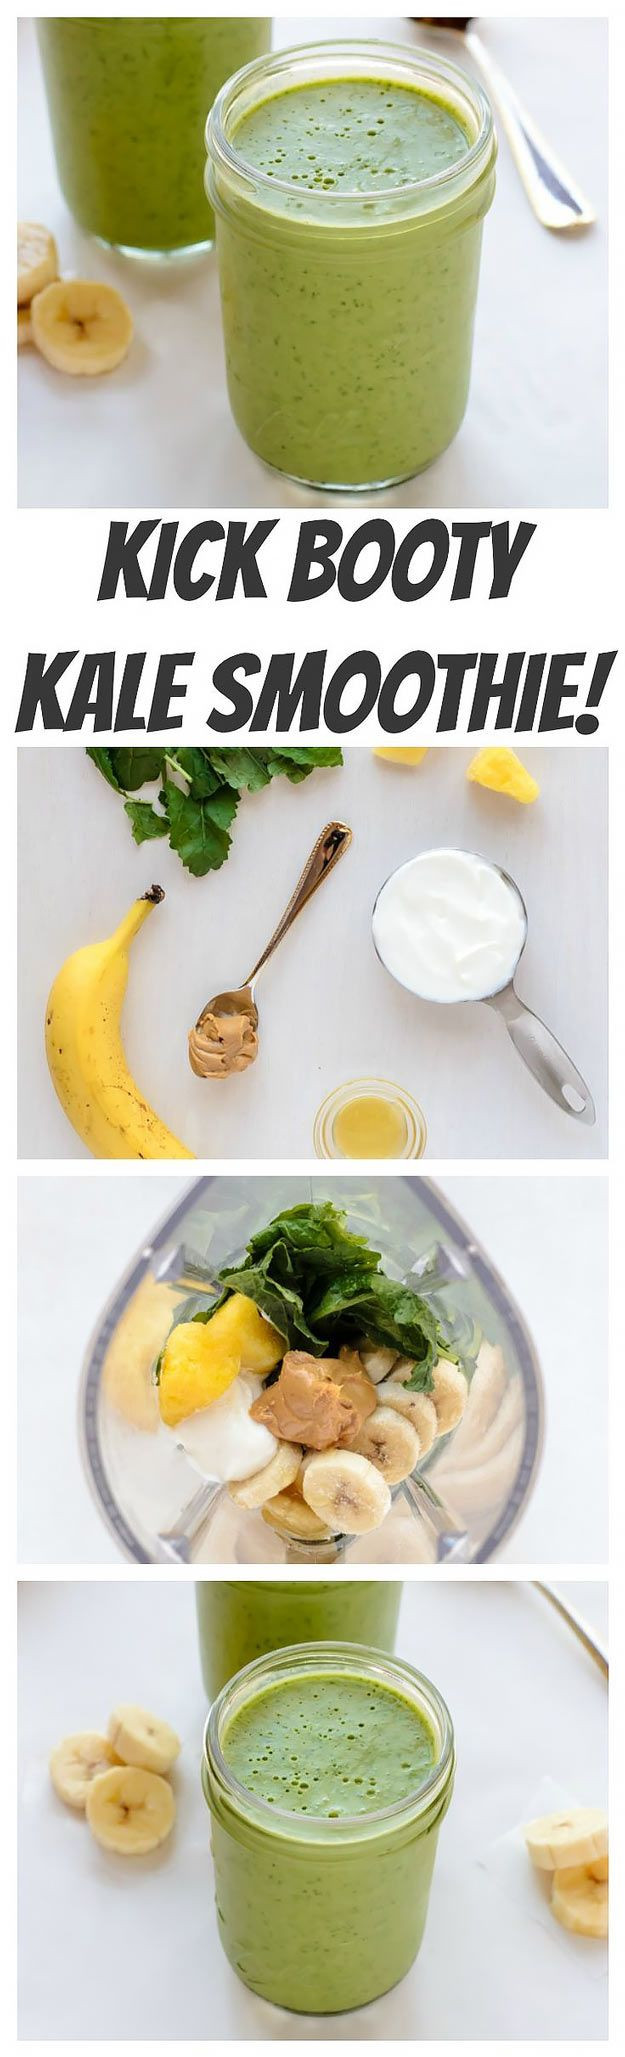 Low Calorie High Protein Smoothies
 31 Healthy Smoothie Recipes Simply Smoothies